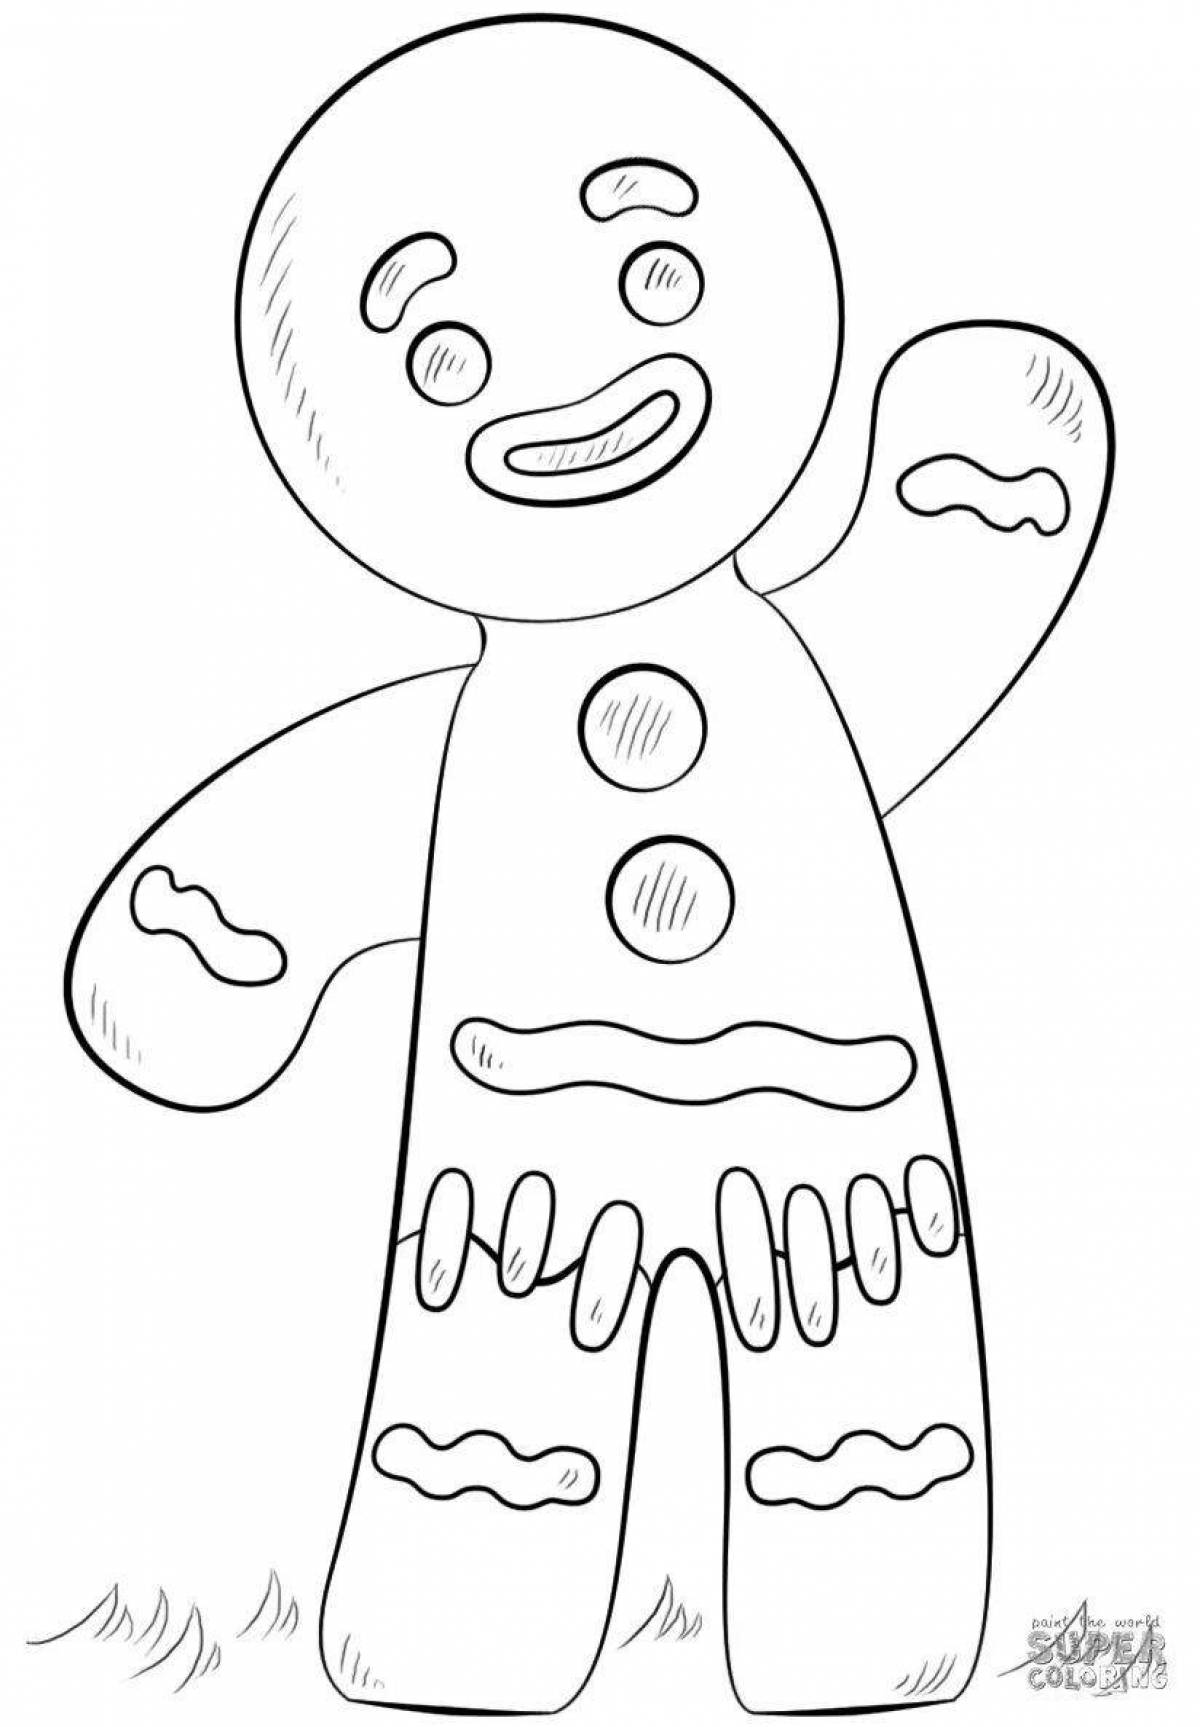 Shrek cookie coloring page live